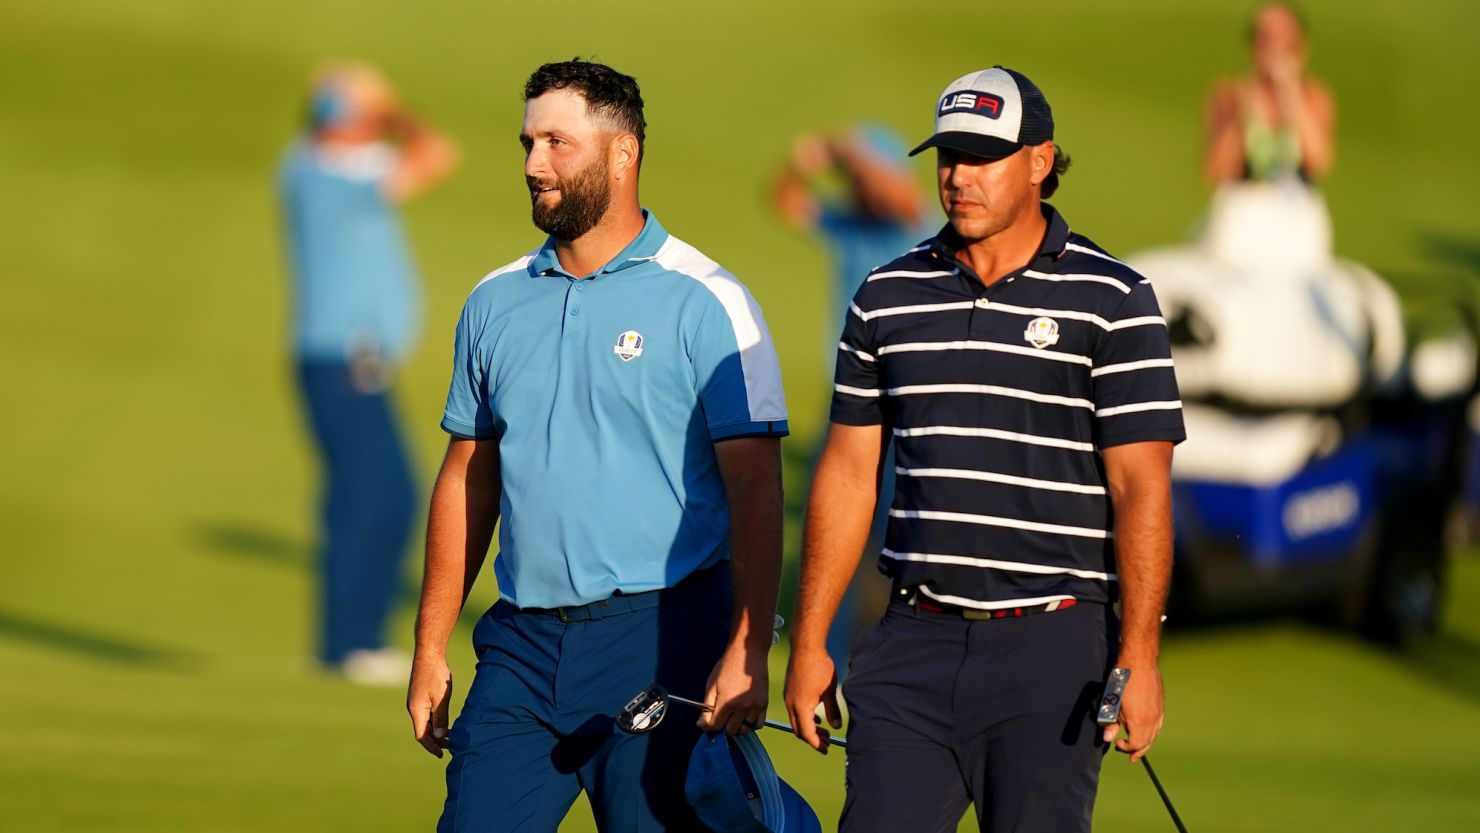 USA's Brooks Koepka shakes with Team Europe's Jon Rahm following the fourballs on day one of the 44th Ryder Cup at the Marco Simone Golf and Country Club, Rome, Italy. Picture date: Friday September 29, 2023. (Photo by Mike Egerton/PA Images via Getty Images)